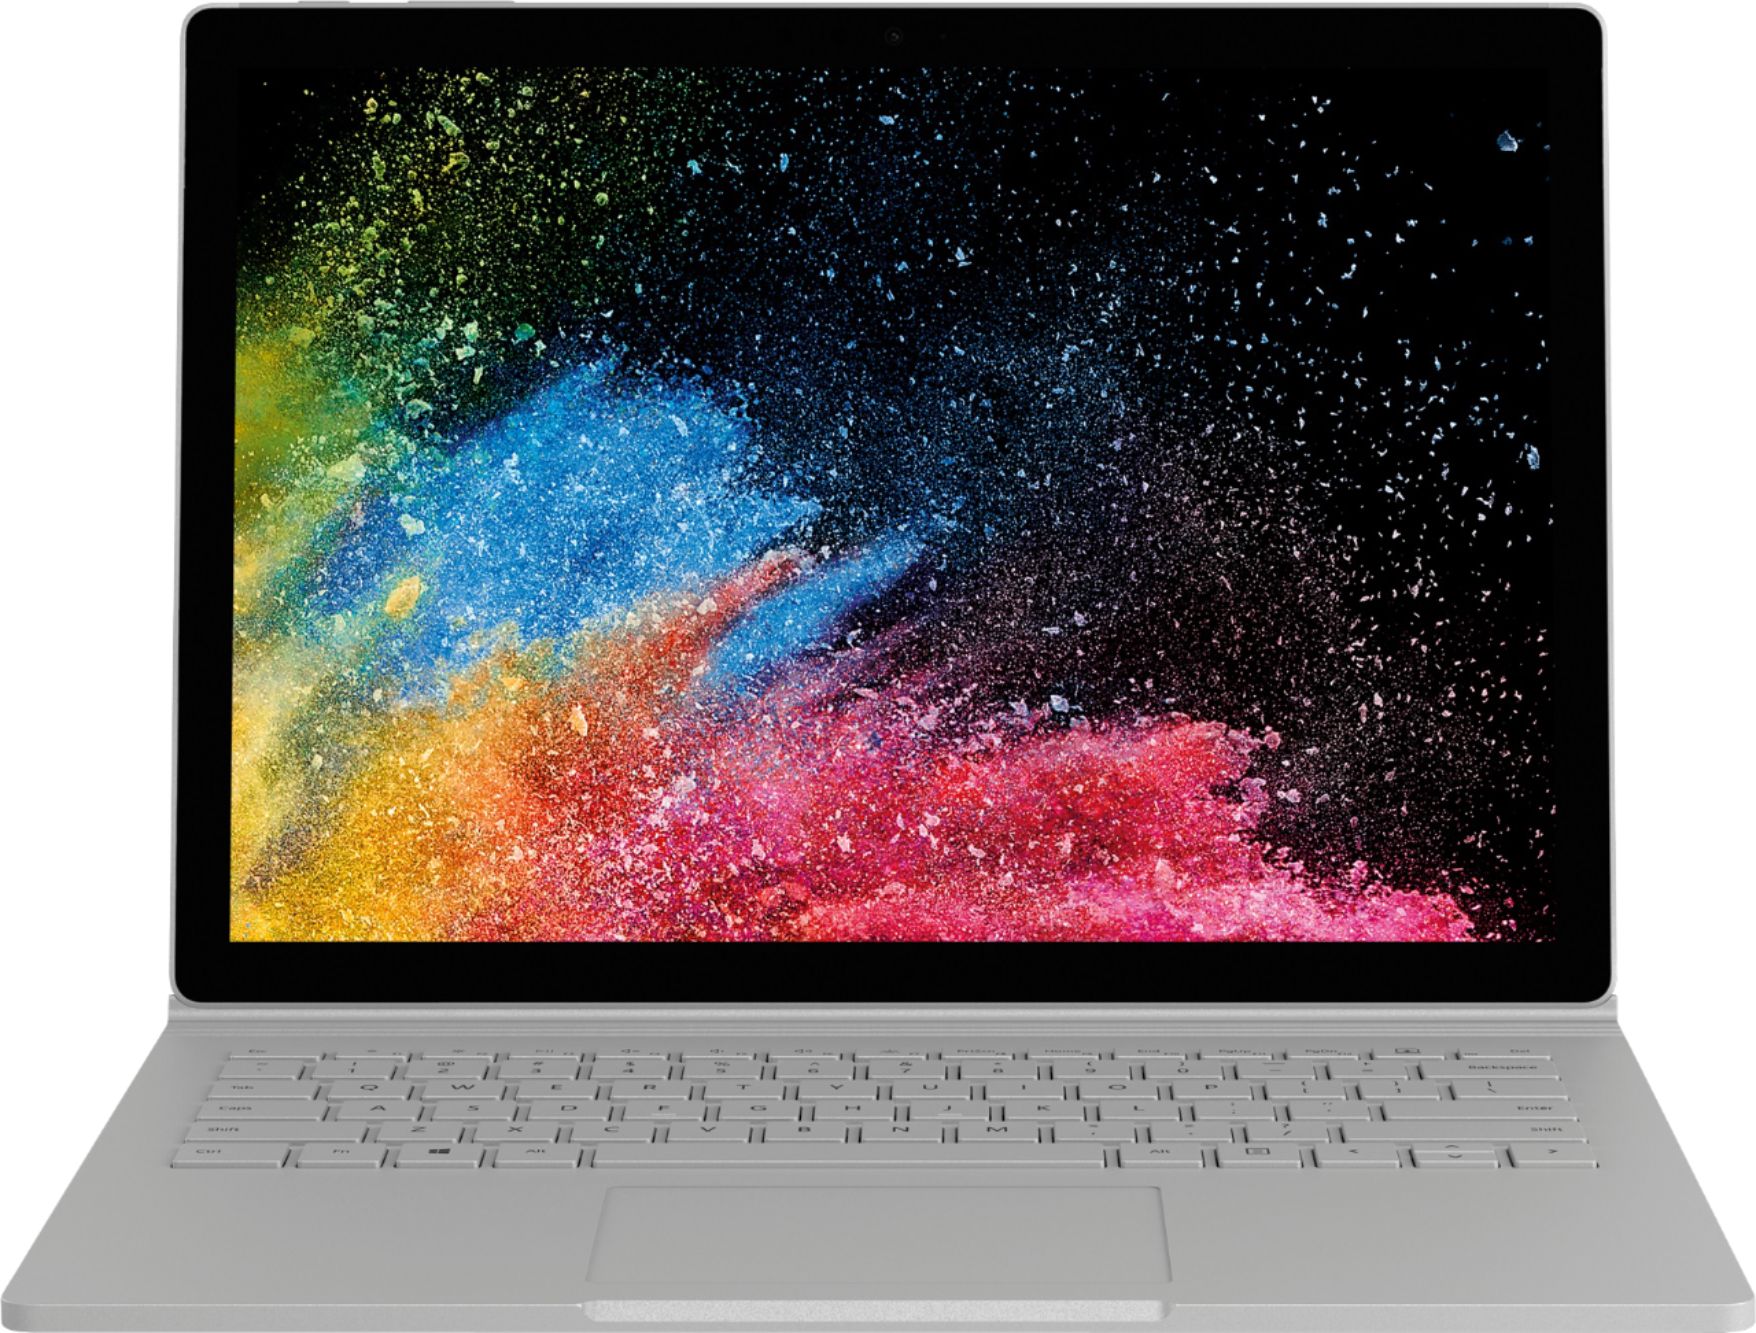 Angle View: Microsoft - Geek Squad Certified Refurbished Surface Book 2 - 13.5" Touch-Screen Laptop - Intel Core i7 - 16GB Memory - 1TB SSD - Platinum